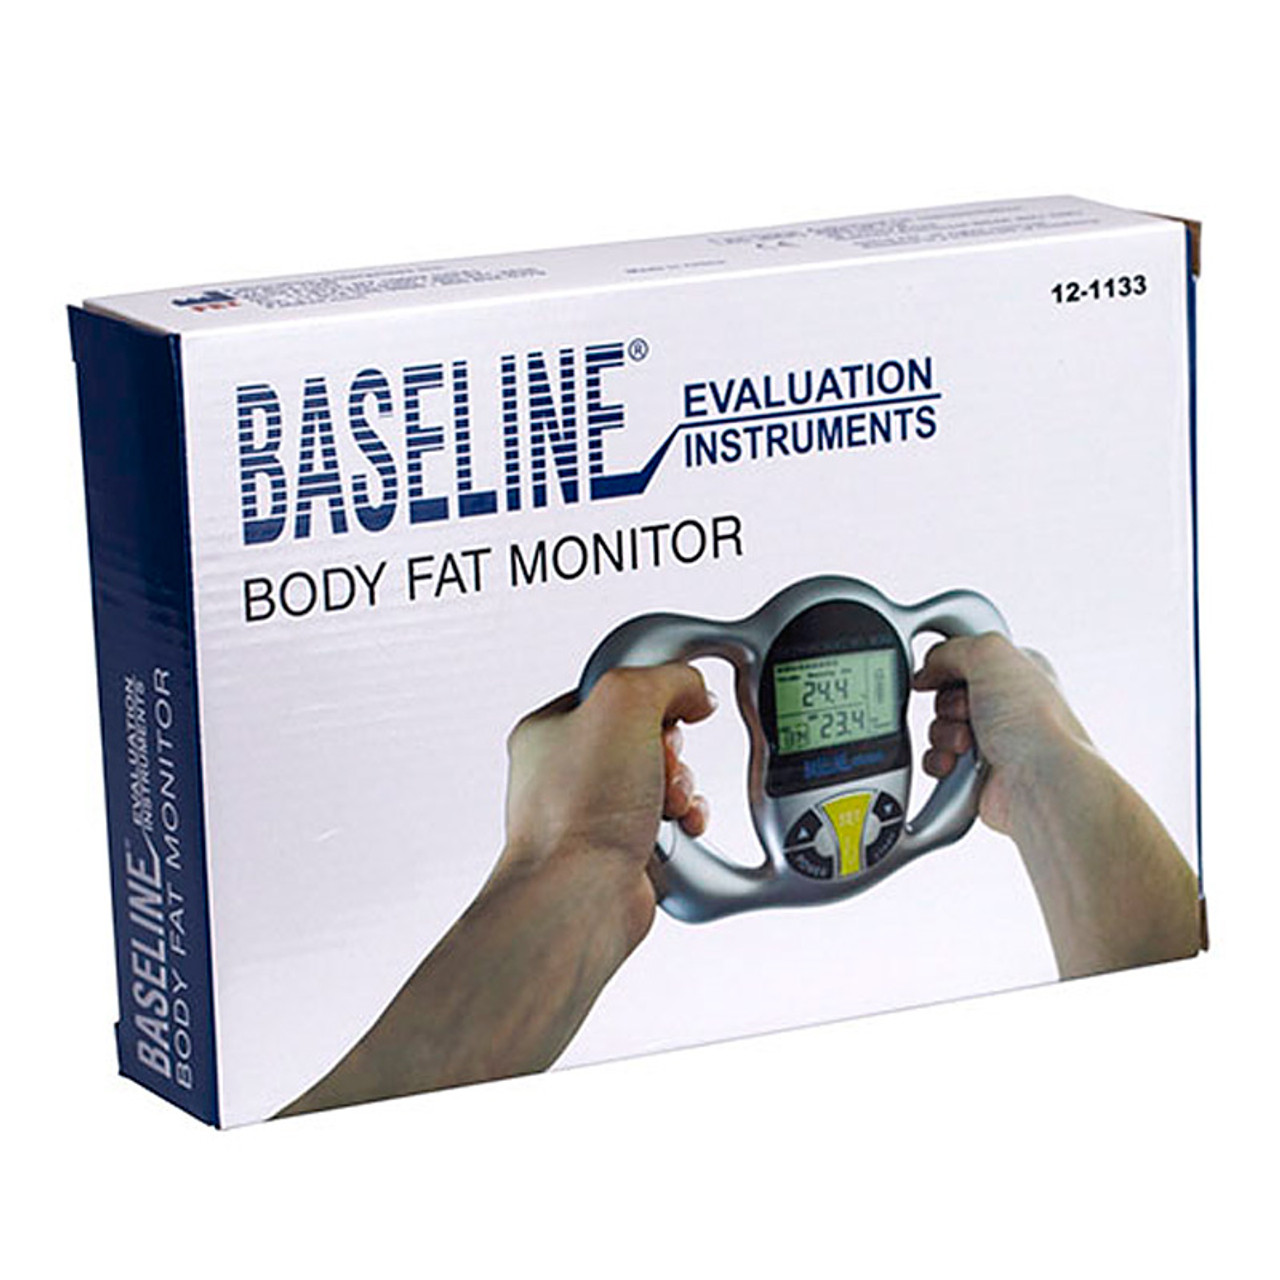 Handheld Body Fat Tester, Body Composition Analyzer, Body Fat Measuring  Instrument BMI Meter Fat Analyzer Body Fat Monitor Fat Measuring Device